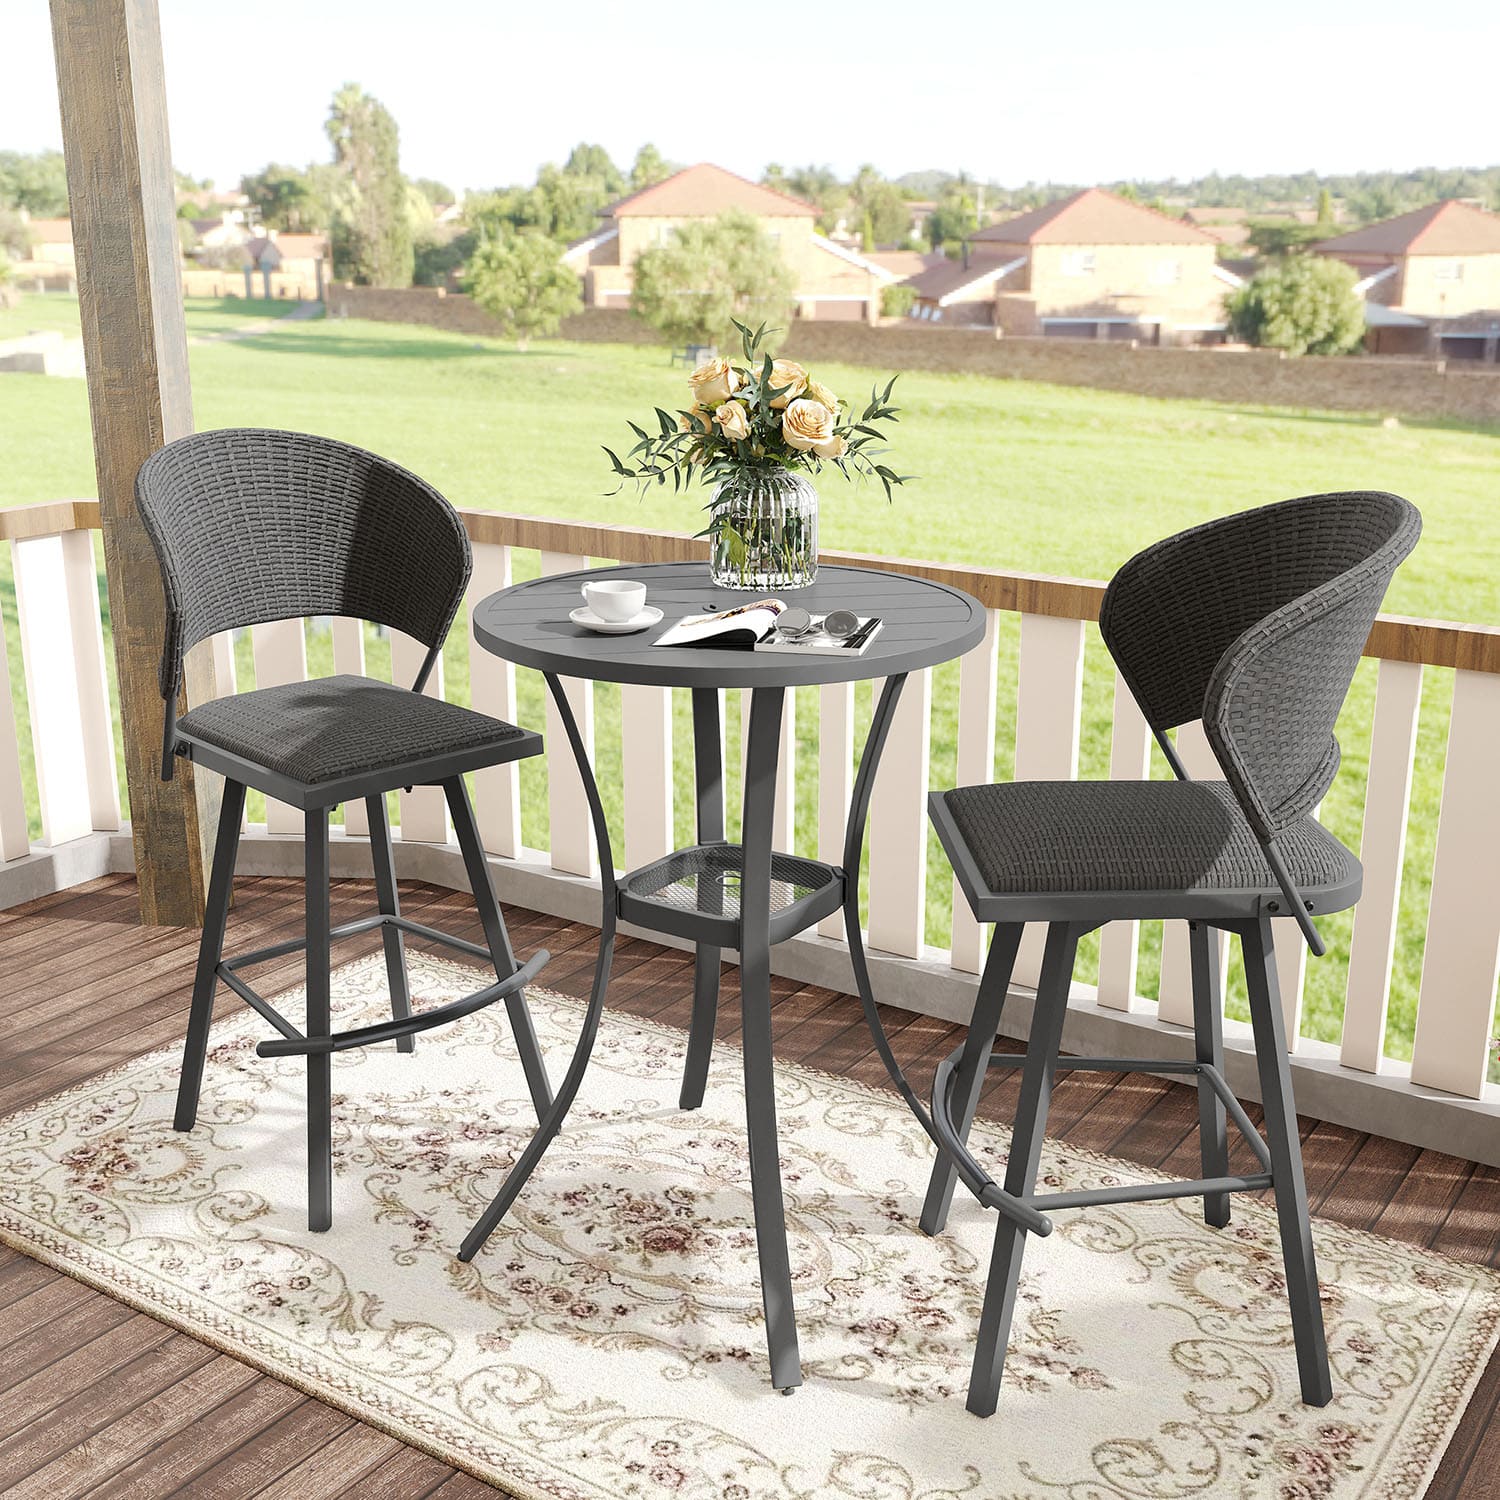 Vicllax 3/5 PCS Outdoor Swivel Bar Set, Patio Wicker Bar Chairs and Round Bar Table